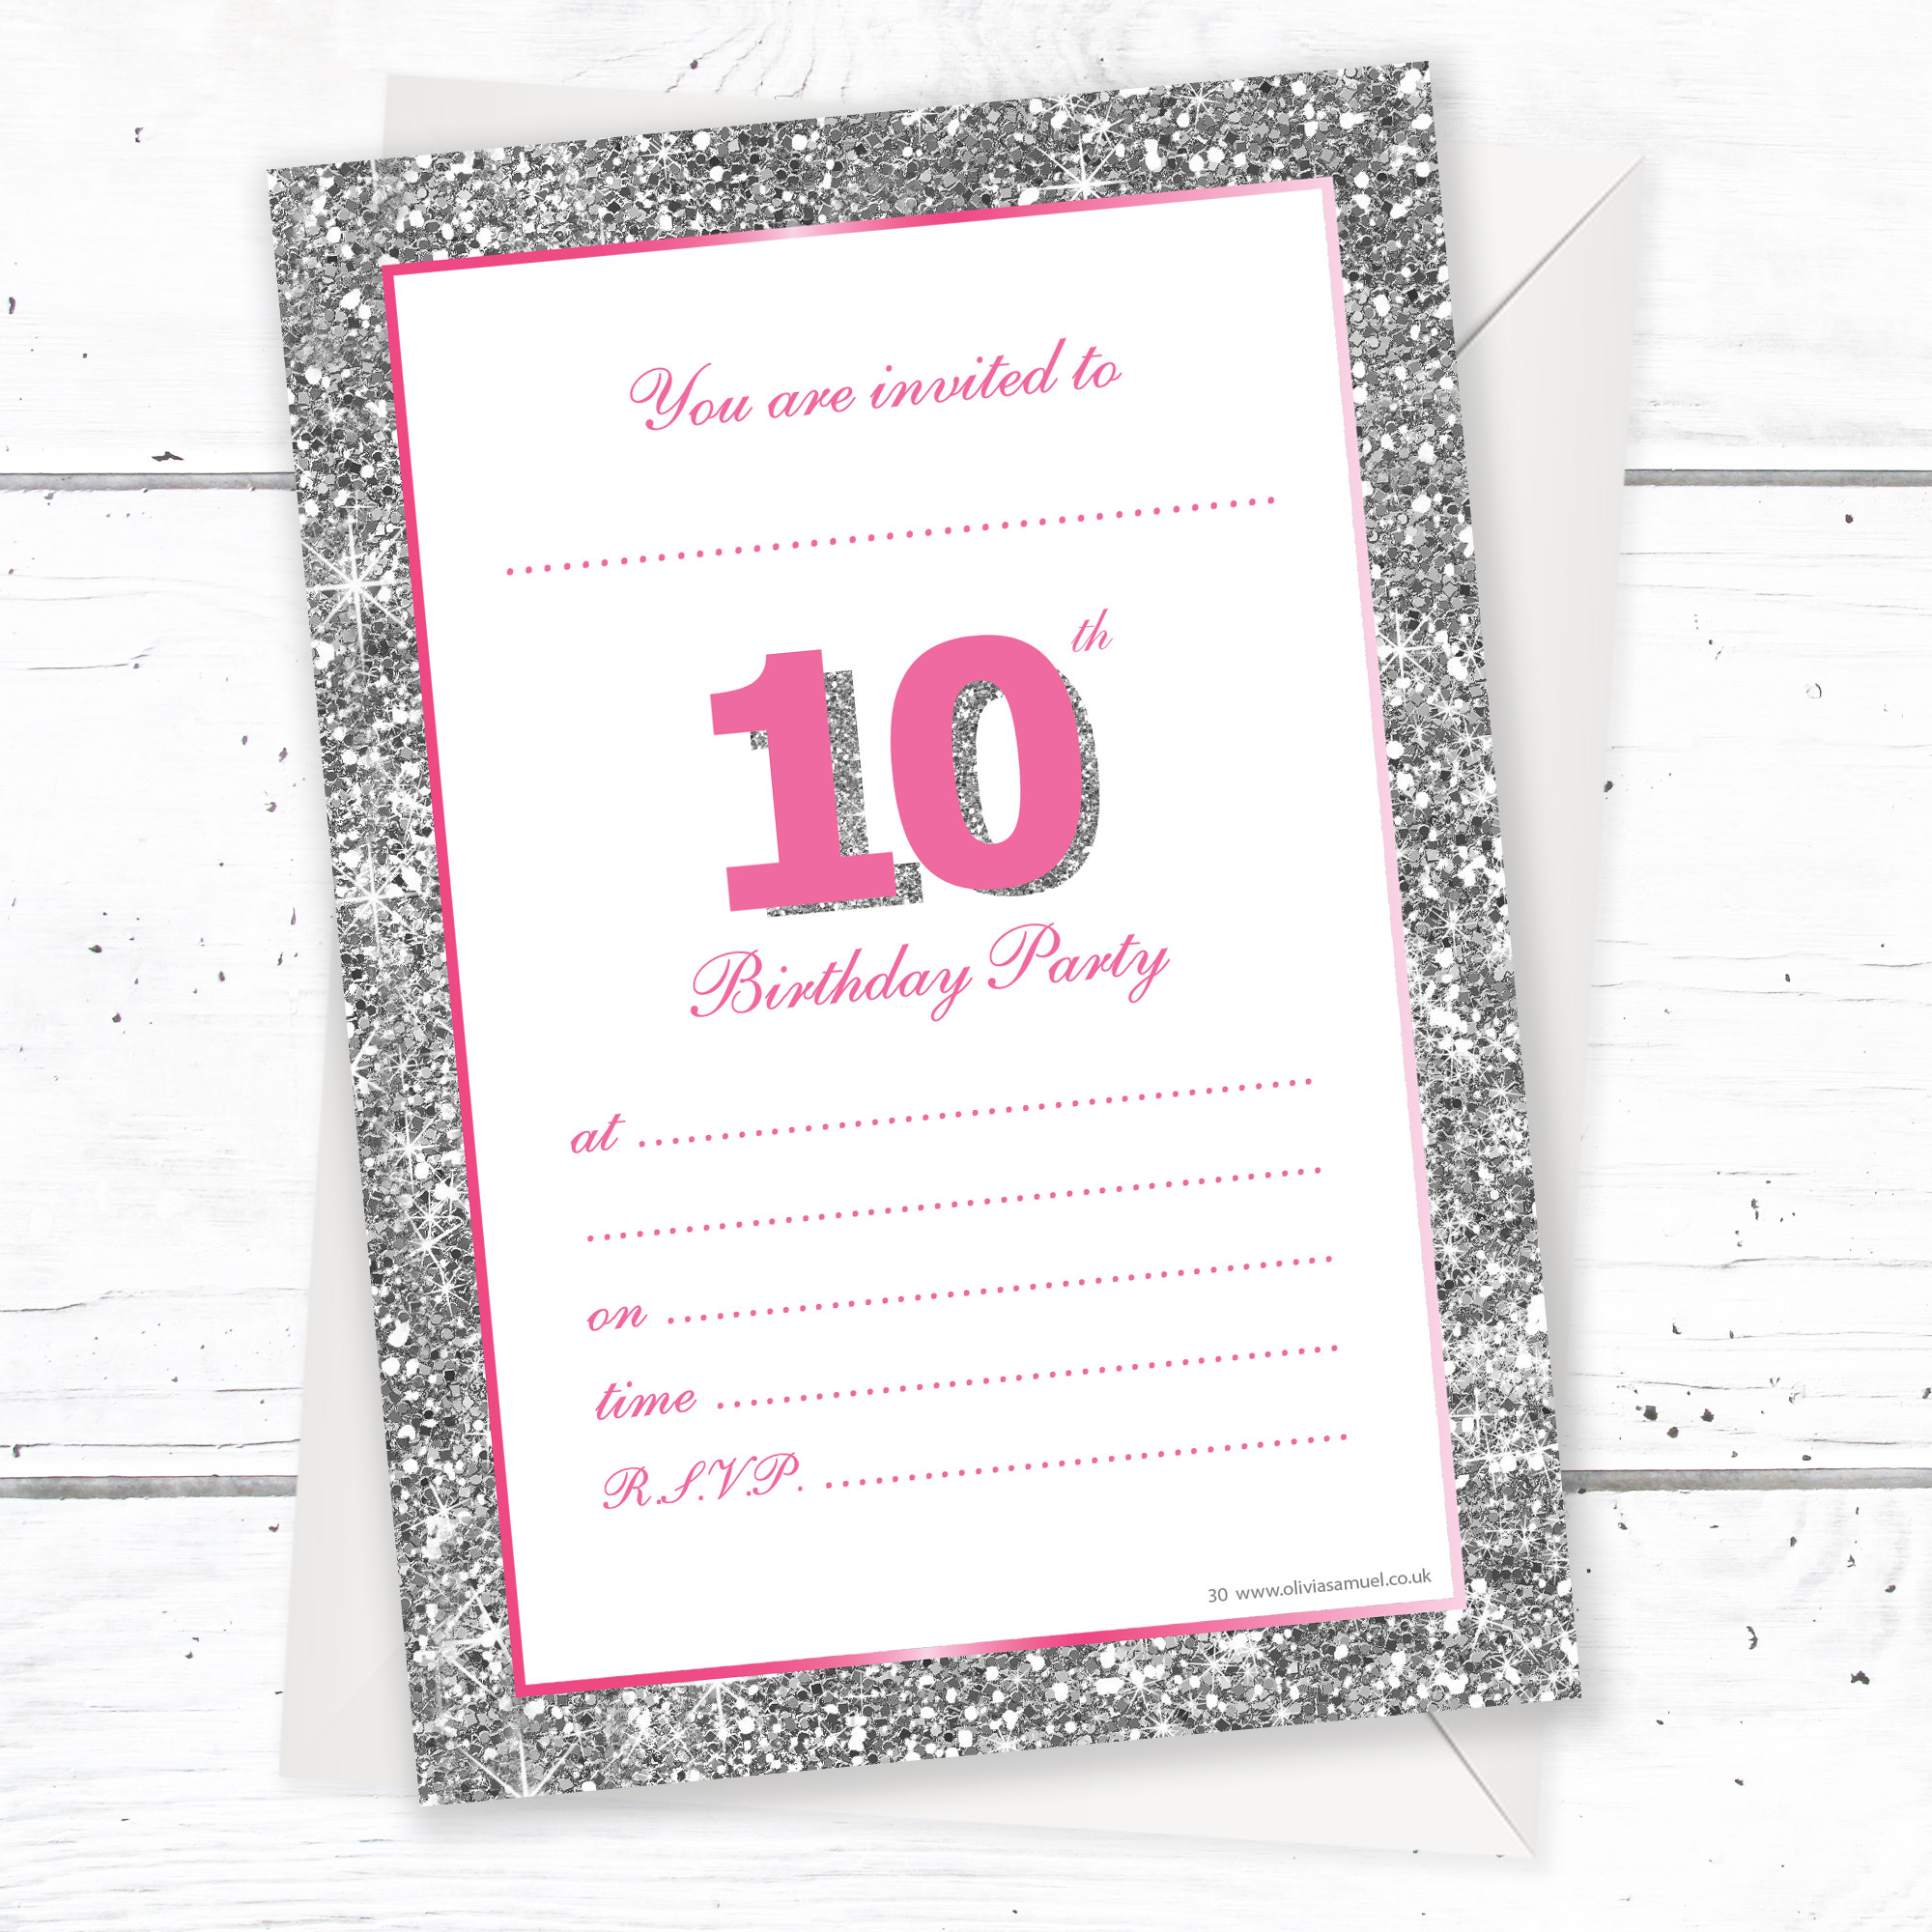 10th Birthday Invitations
 10th Birthday Party Invitations – Pink Sparkly Design and